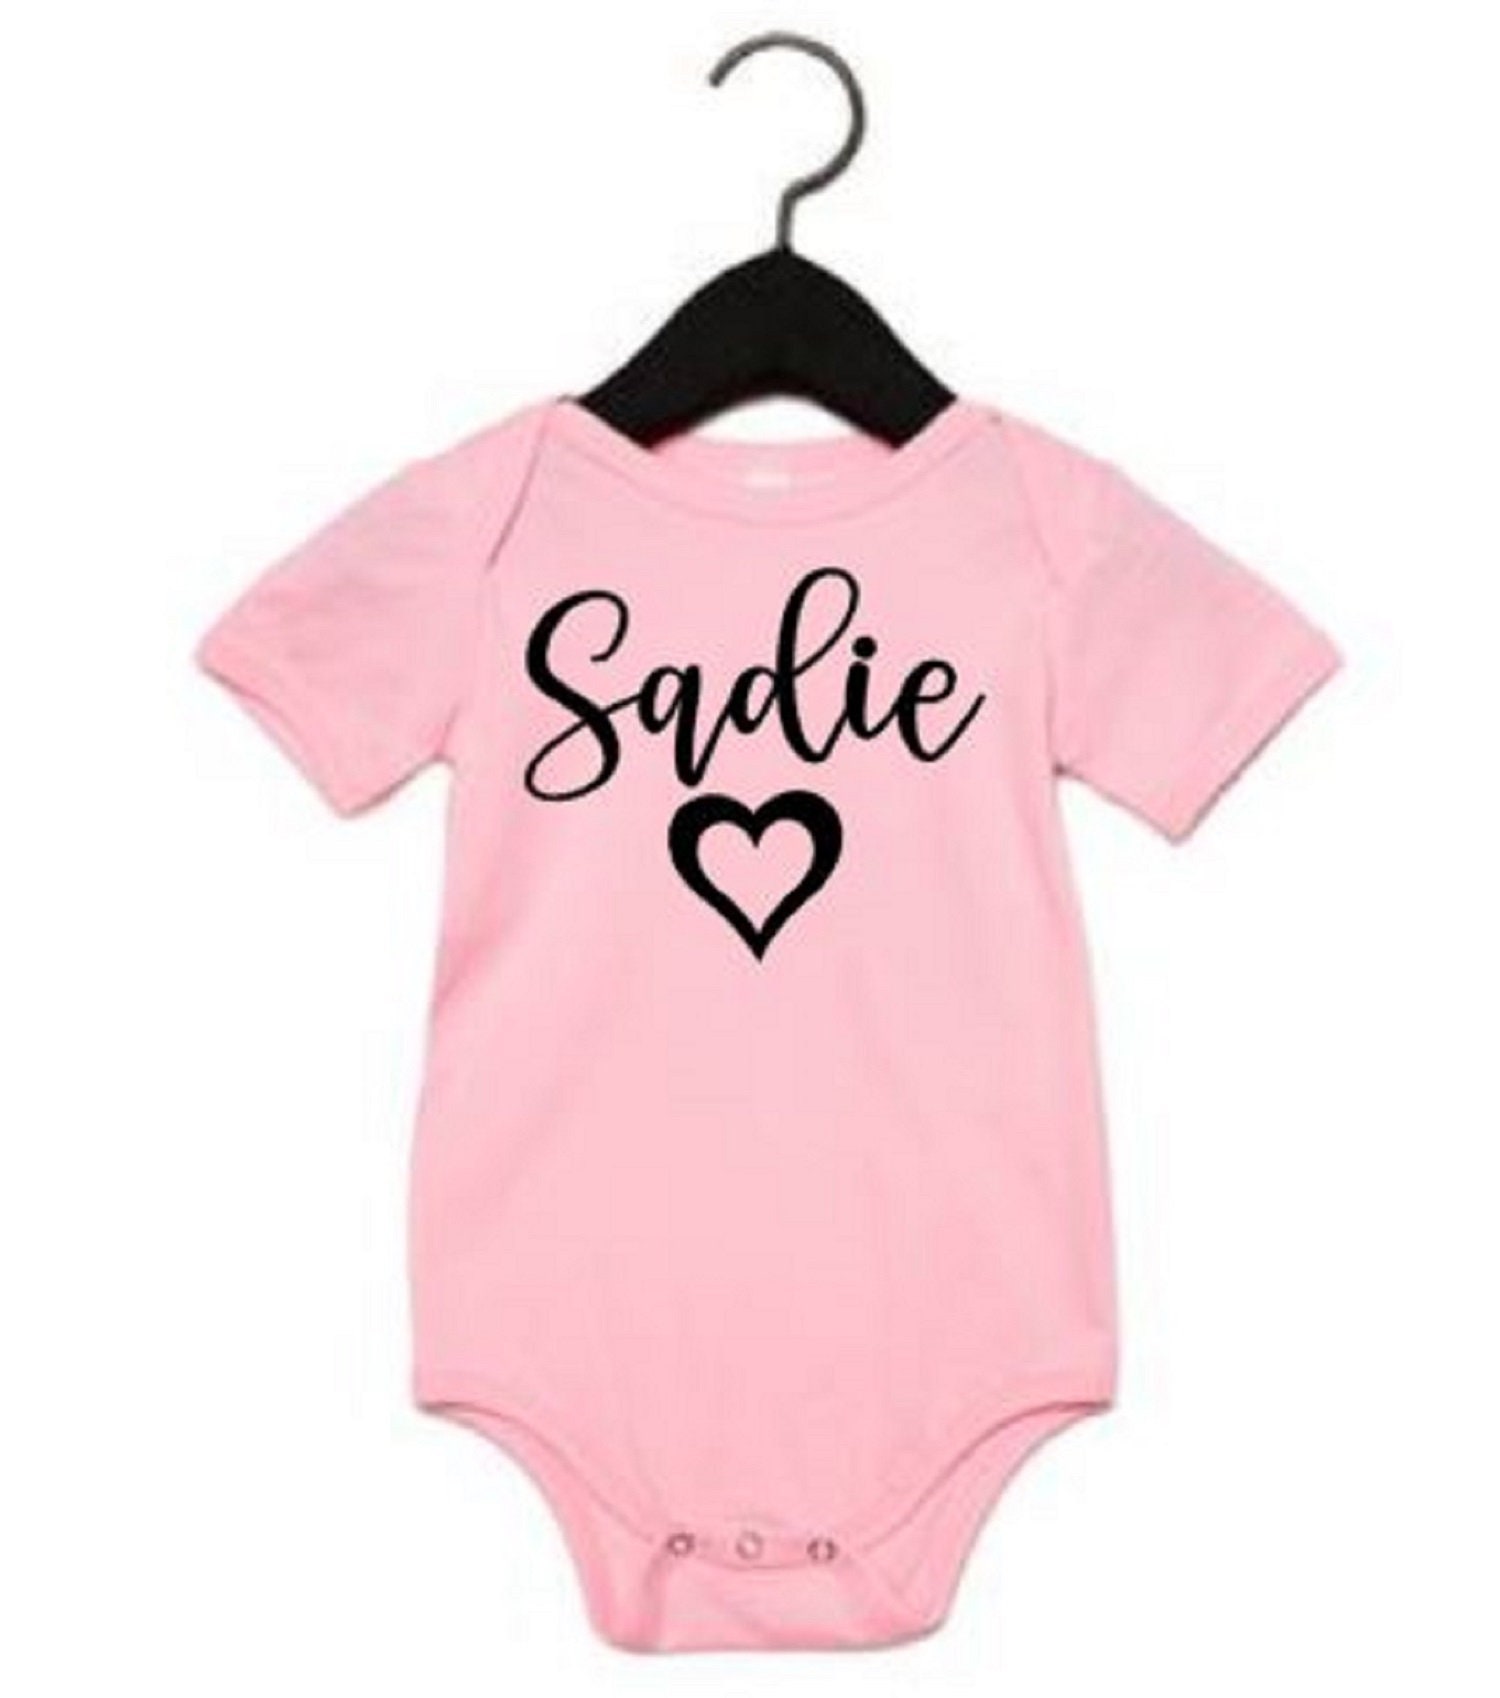 Baby Girl Personalized Gift Personalized Infant Bodysuit | Etsy